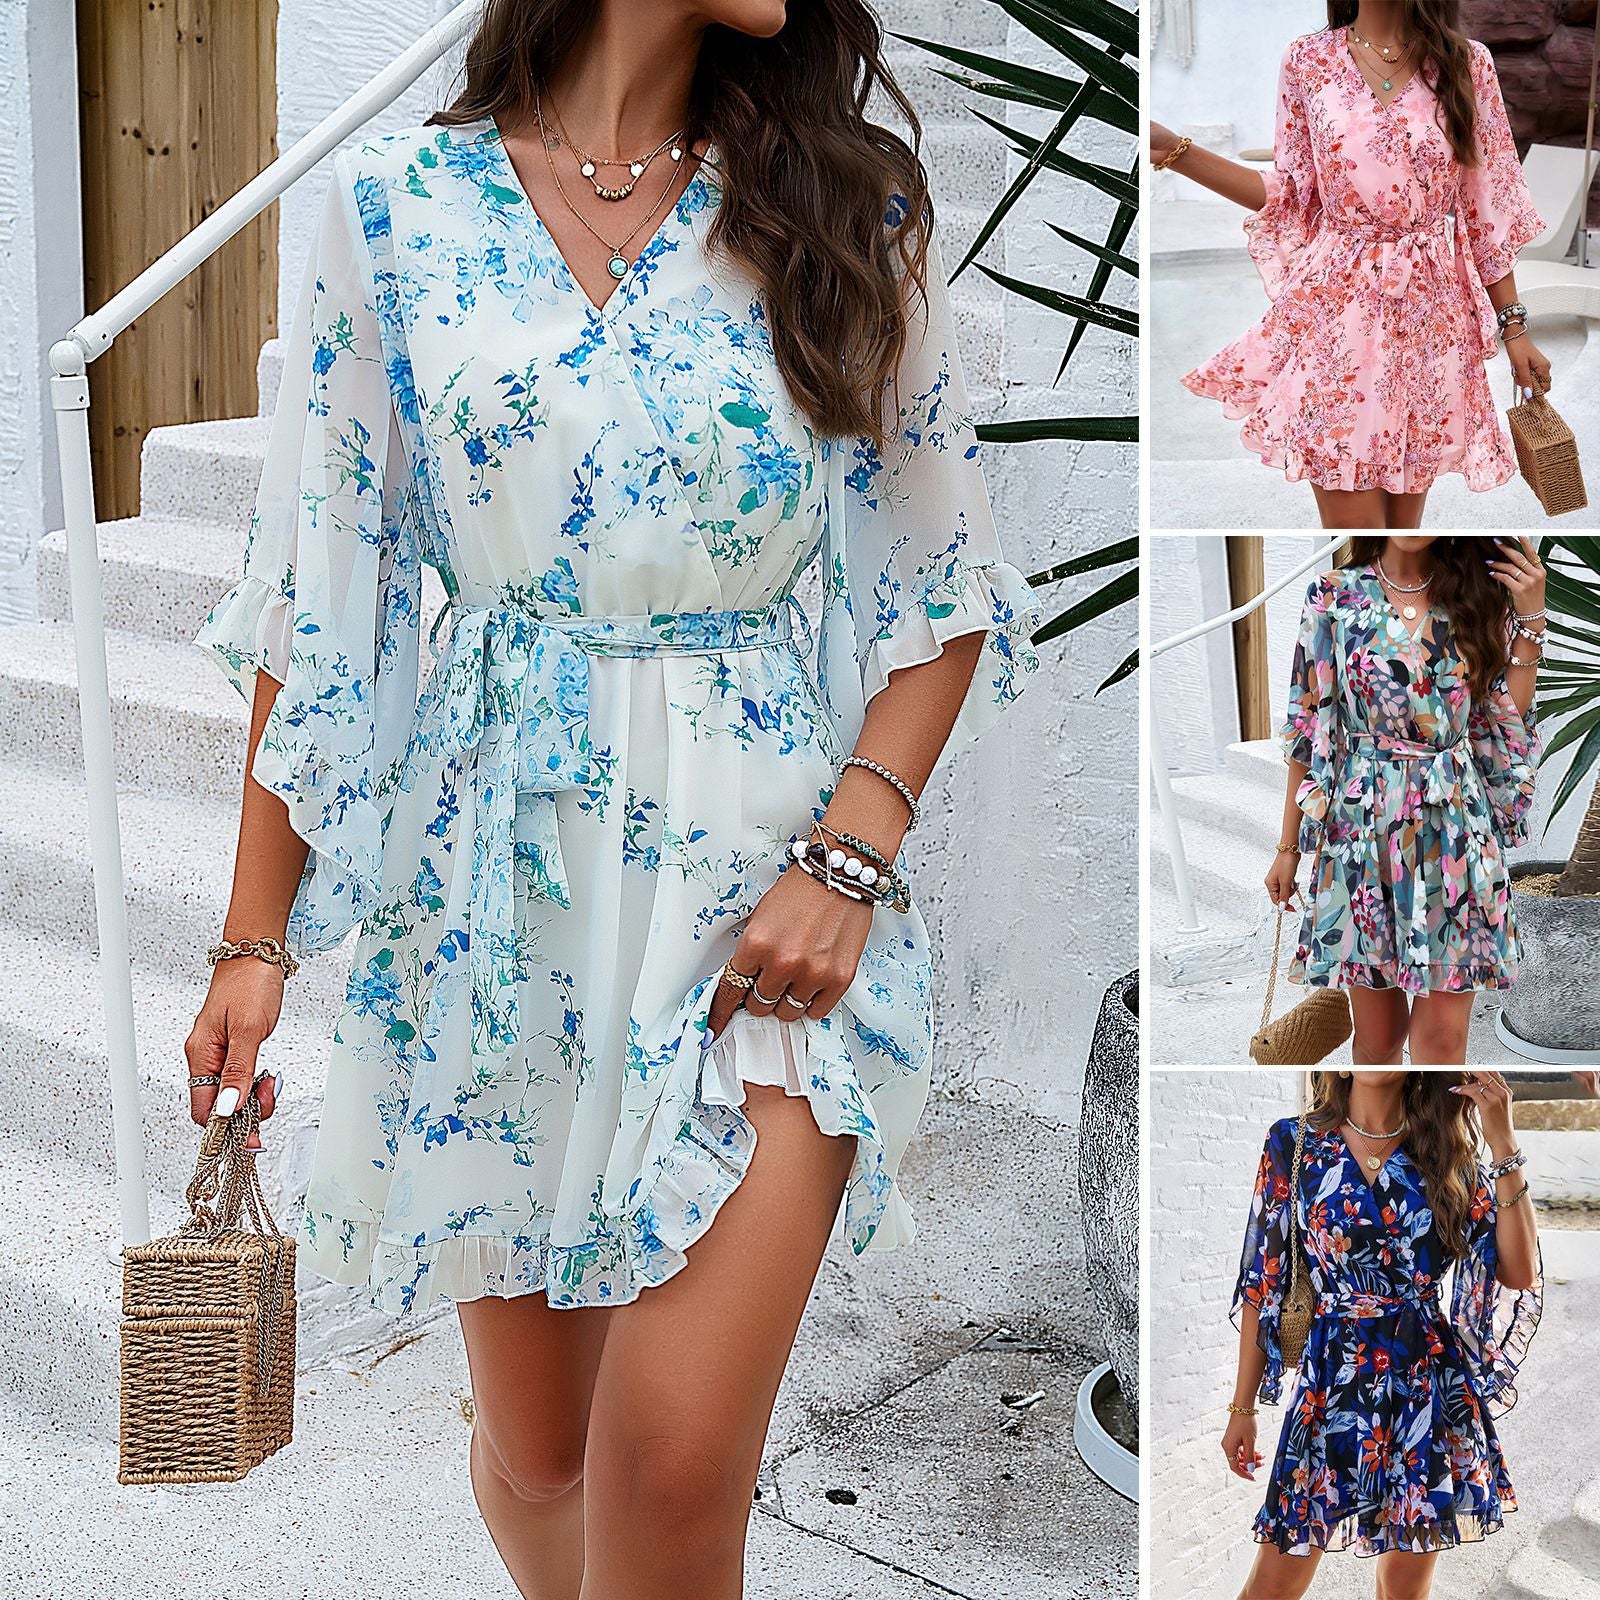 Summer Floral Print Short Sleeves Dress Lace Up Ruffles Design Fashion V-neck Short Dresses Womens Clothing apparel & accessories